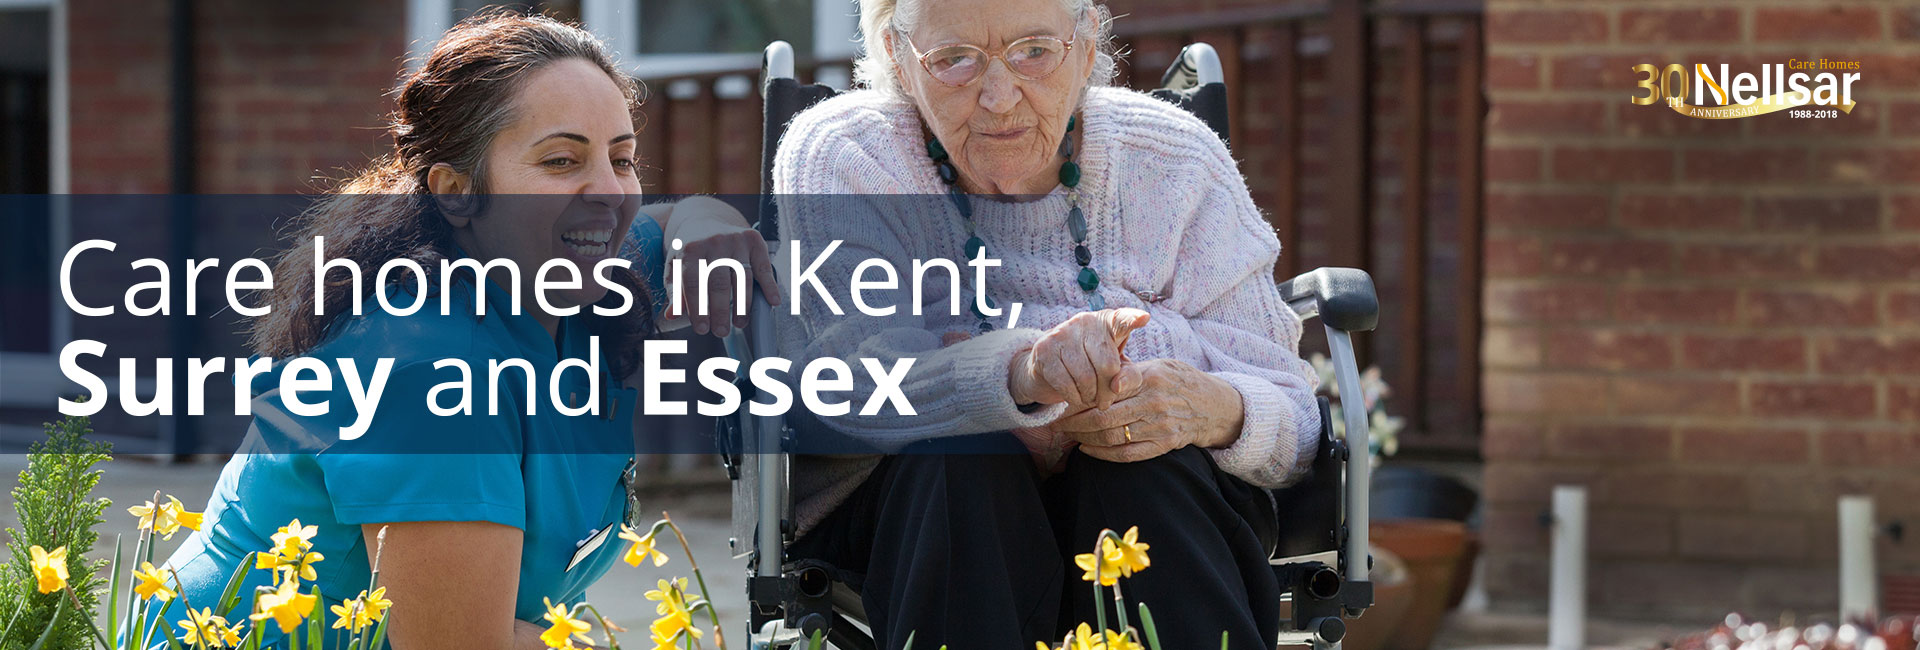 Care Homes Kent Surrey and Essex